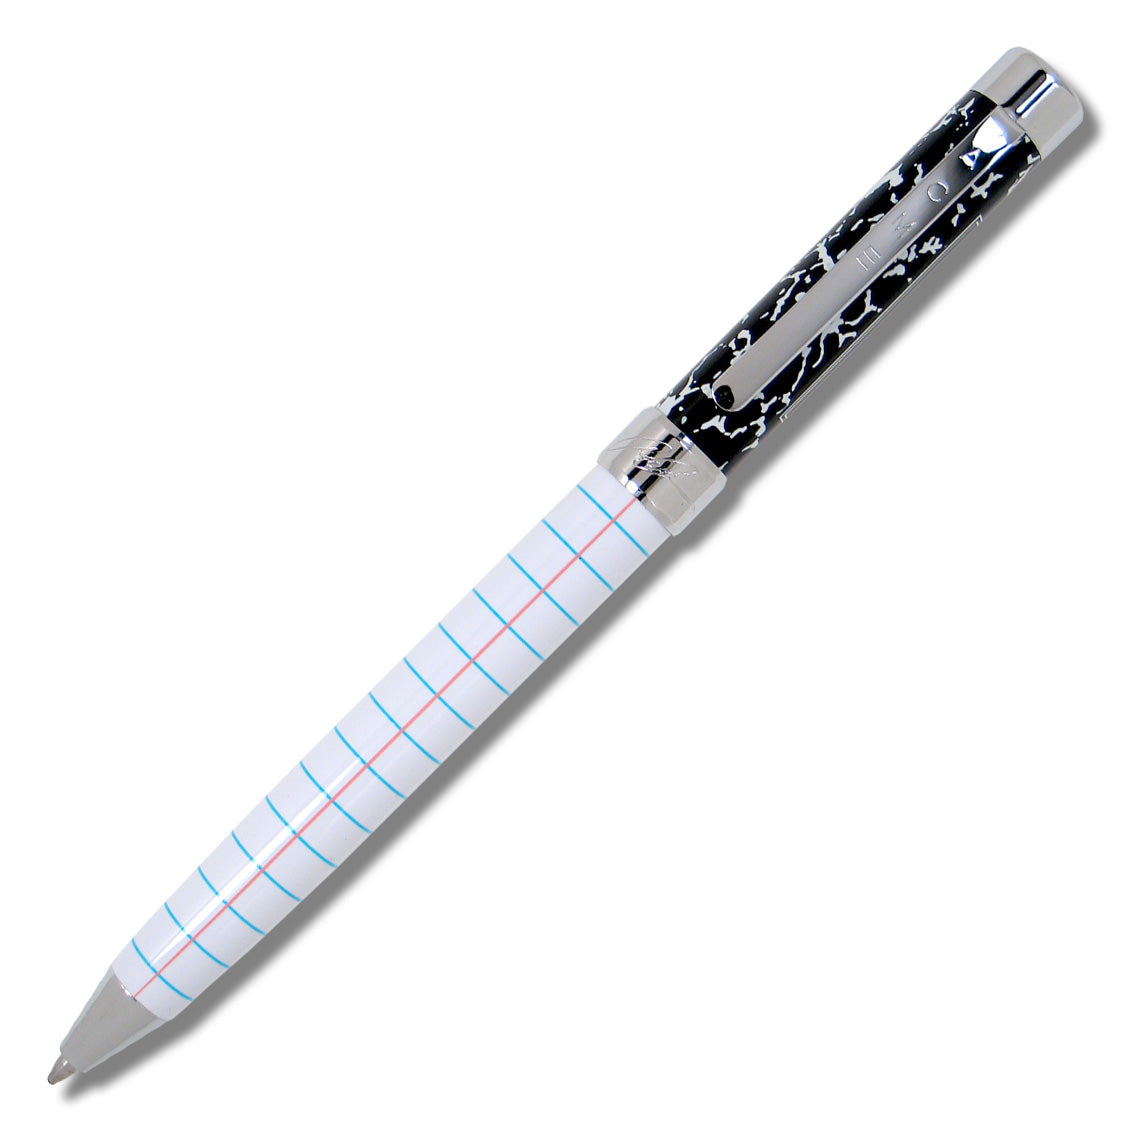 ACME Composition by Adrian Olabuenaga Retractable Rollerball Pen from the Brand X Collection